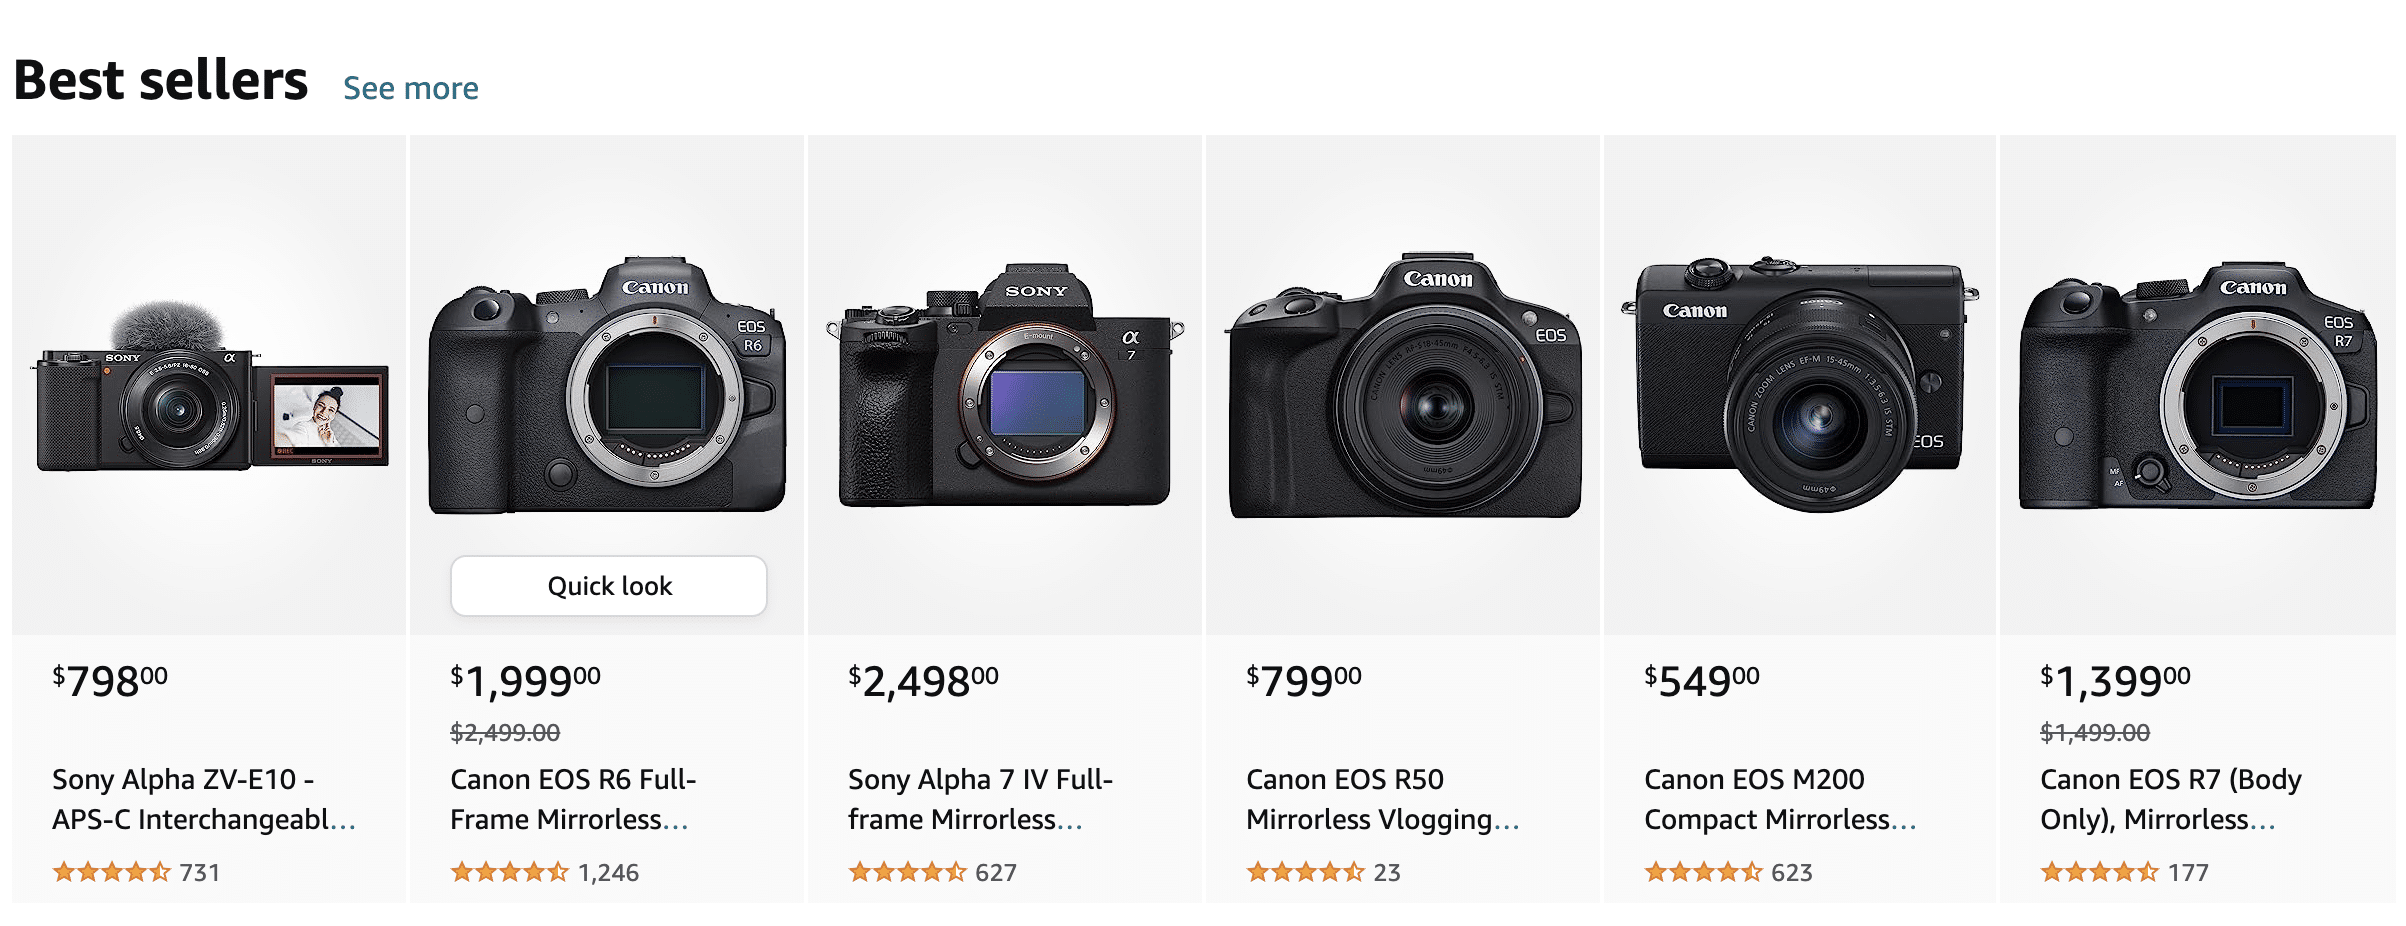 How much is a camera on Amazon?